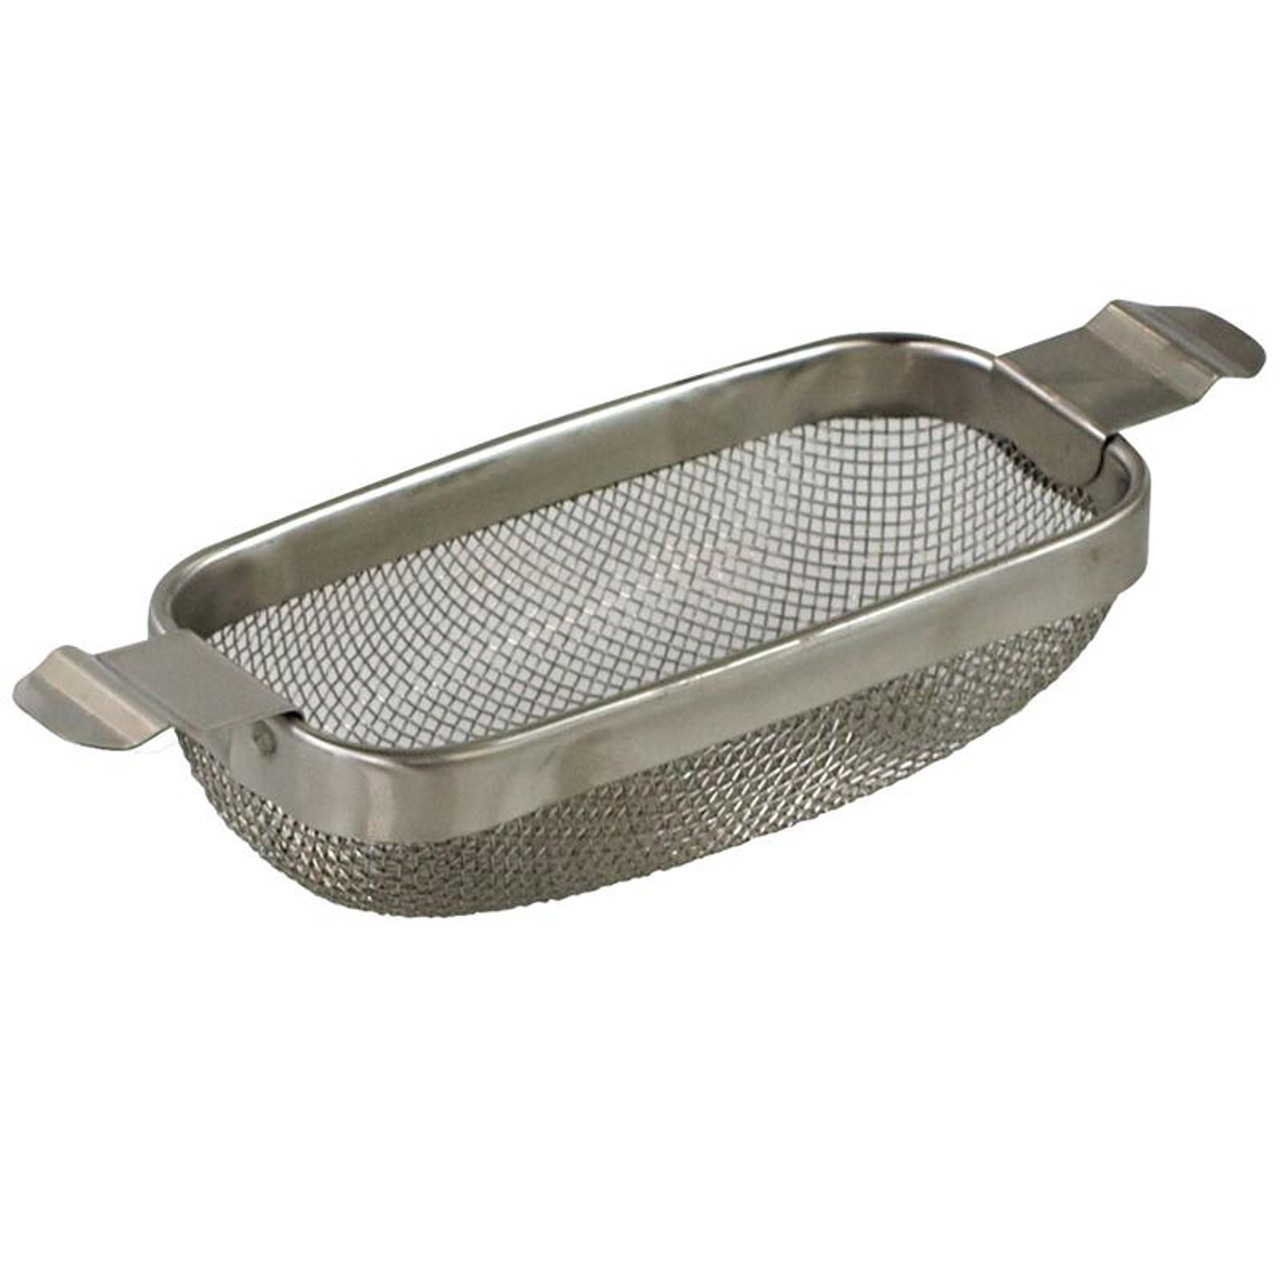 1.5 Pint Stainless Steel Basket for Ultrasonic Jewelry Cleaning | Esslinger